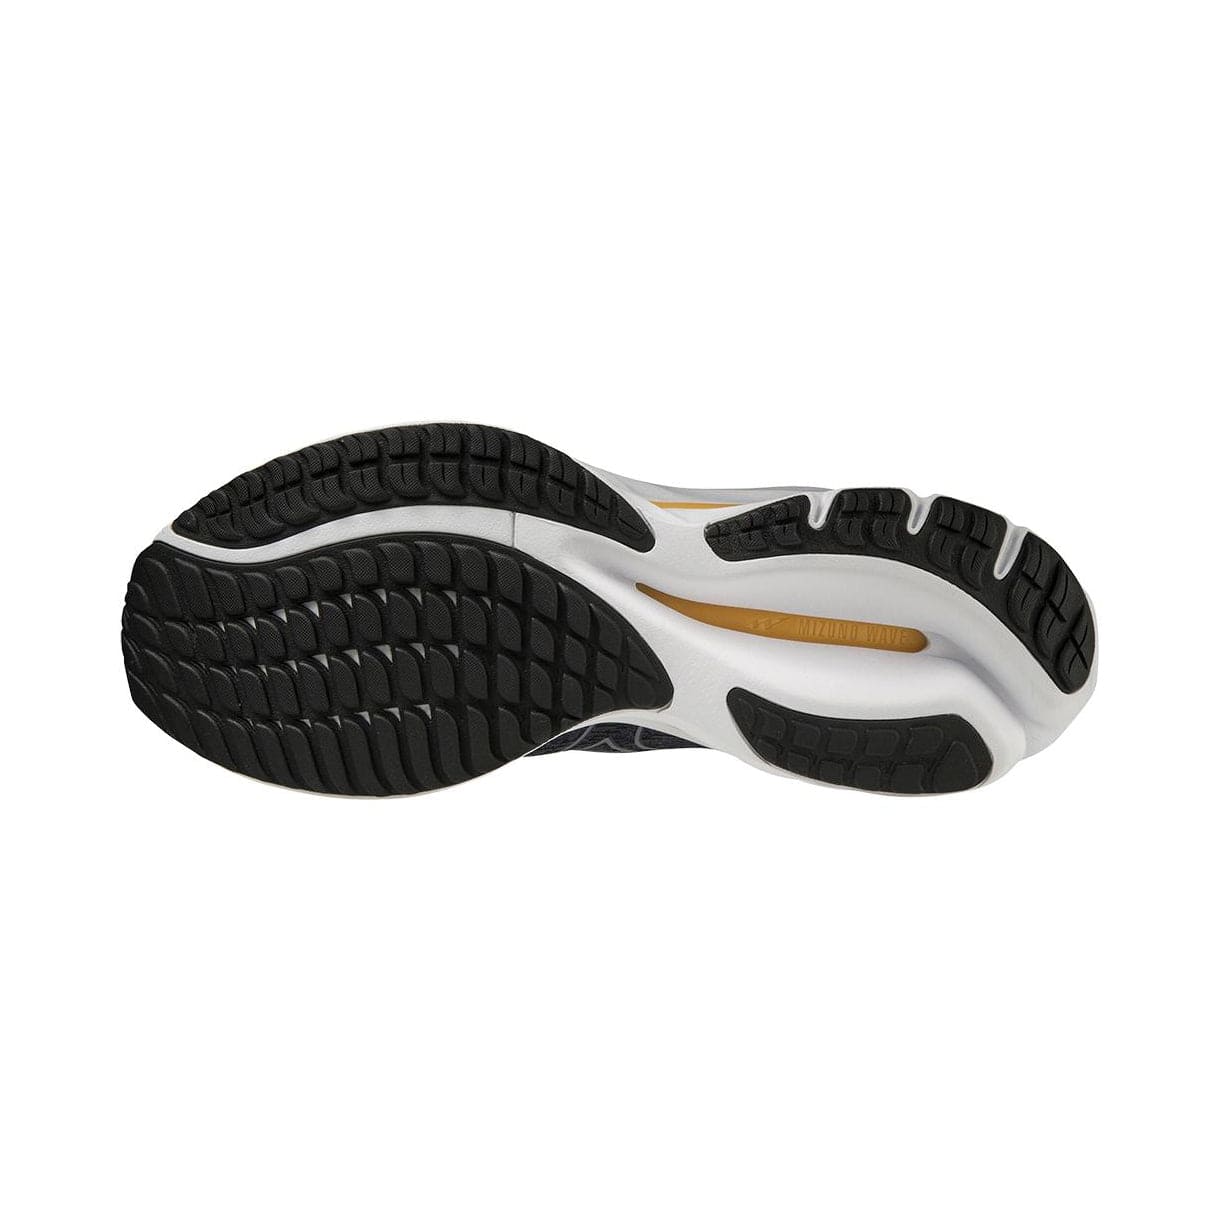 Wave Rider 26 product image